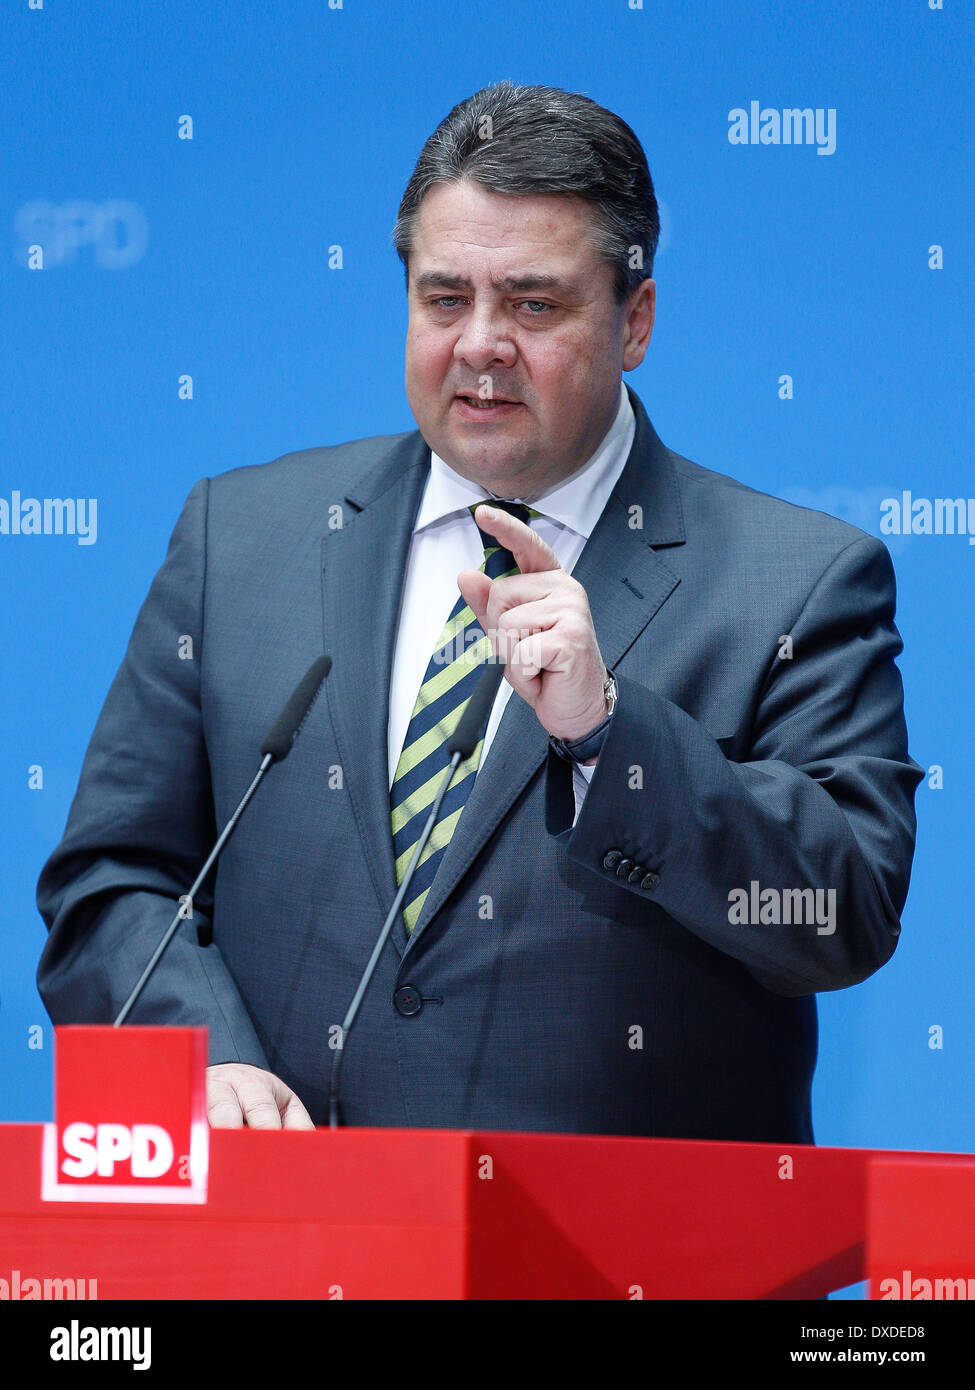 Berlin, Germany. 24th Mar, 2014. Statement on energy policy with Sigmar Gabriel, SPD Chief and Miniter of Economy, and Hannelore Kraft, Minister-President of North Rhine-Westphalia, and Malu Dreyer, Minister-President of Rhineland-Palatinate, and the Deputy Prime Minister of Baden-WÃƒÂ¼rttemberg Nils Schmid at Willy-Brandt-Haus in Berlin./Picture: Sigmar Gabriel, SPD Chief and Miniter of Economy. Credit:  Reynaldo Paganelli/NurPhoto/ZUMAPRESS.com/Alamy Live News Stock Photo